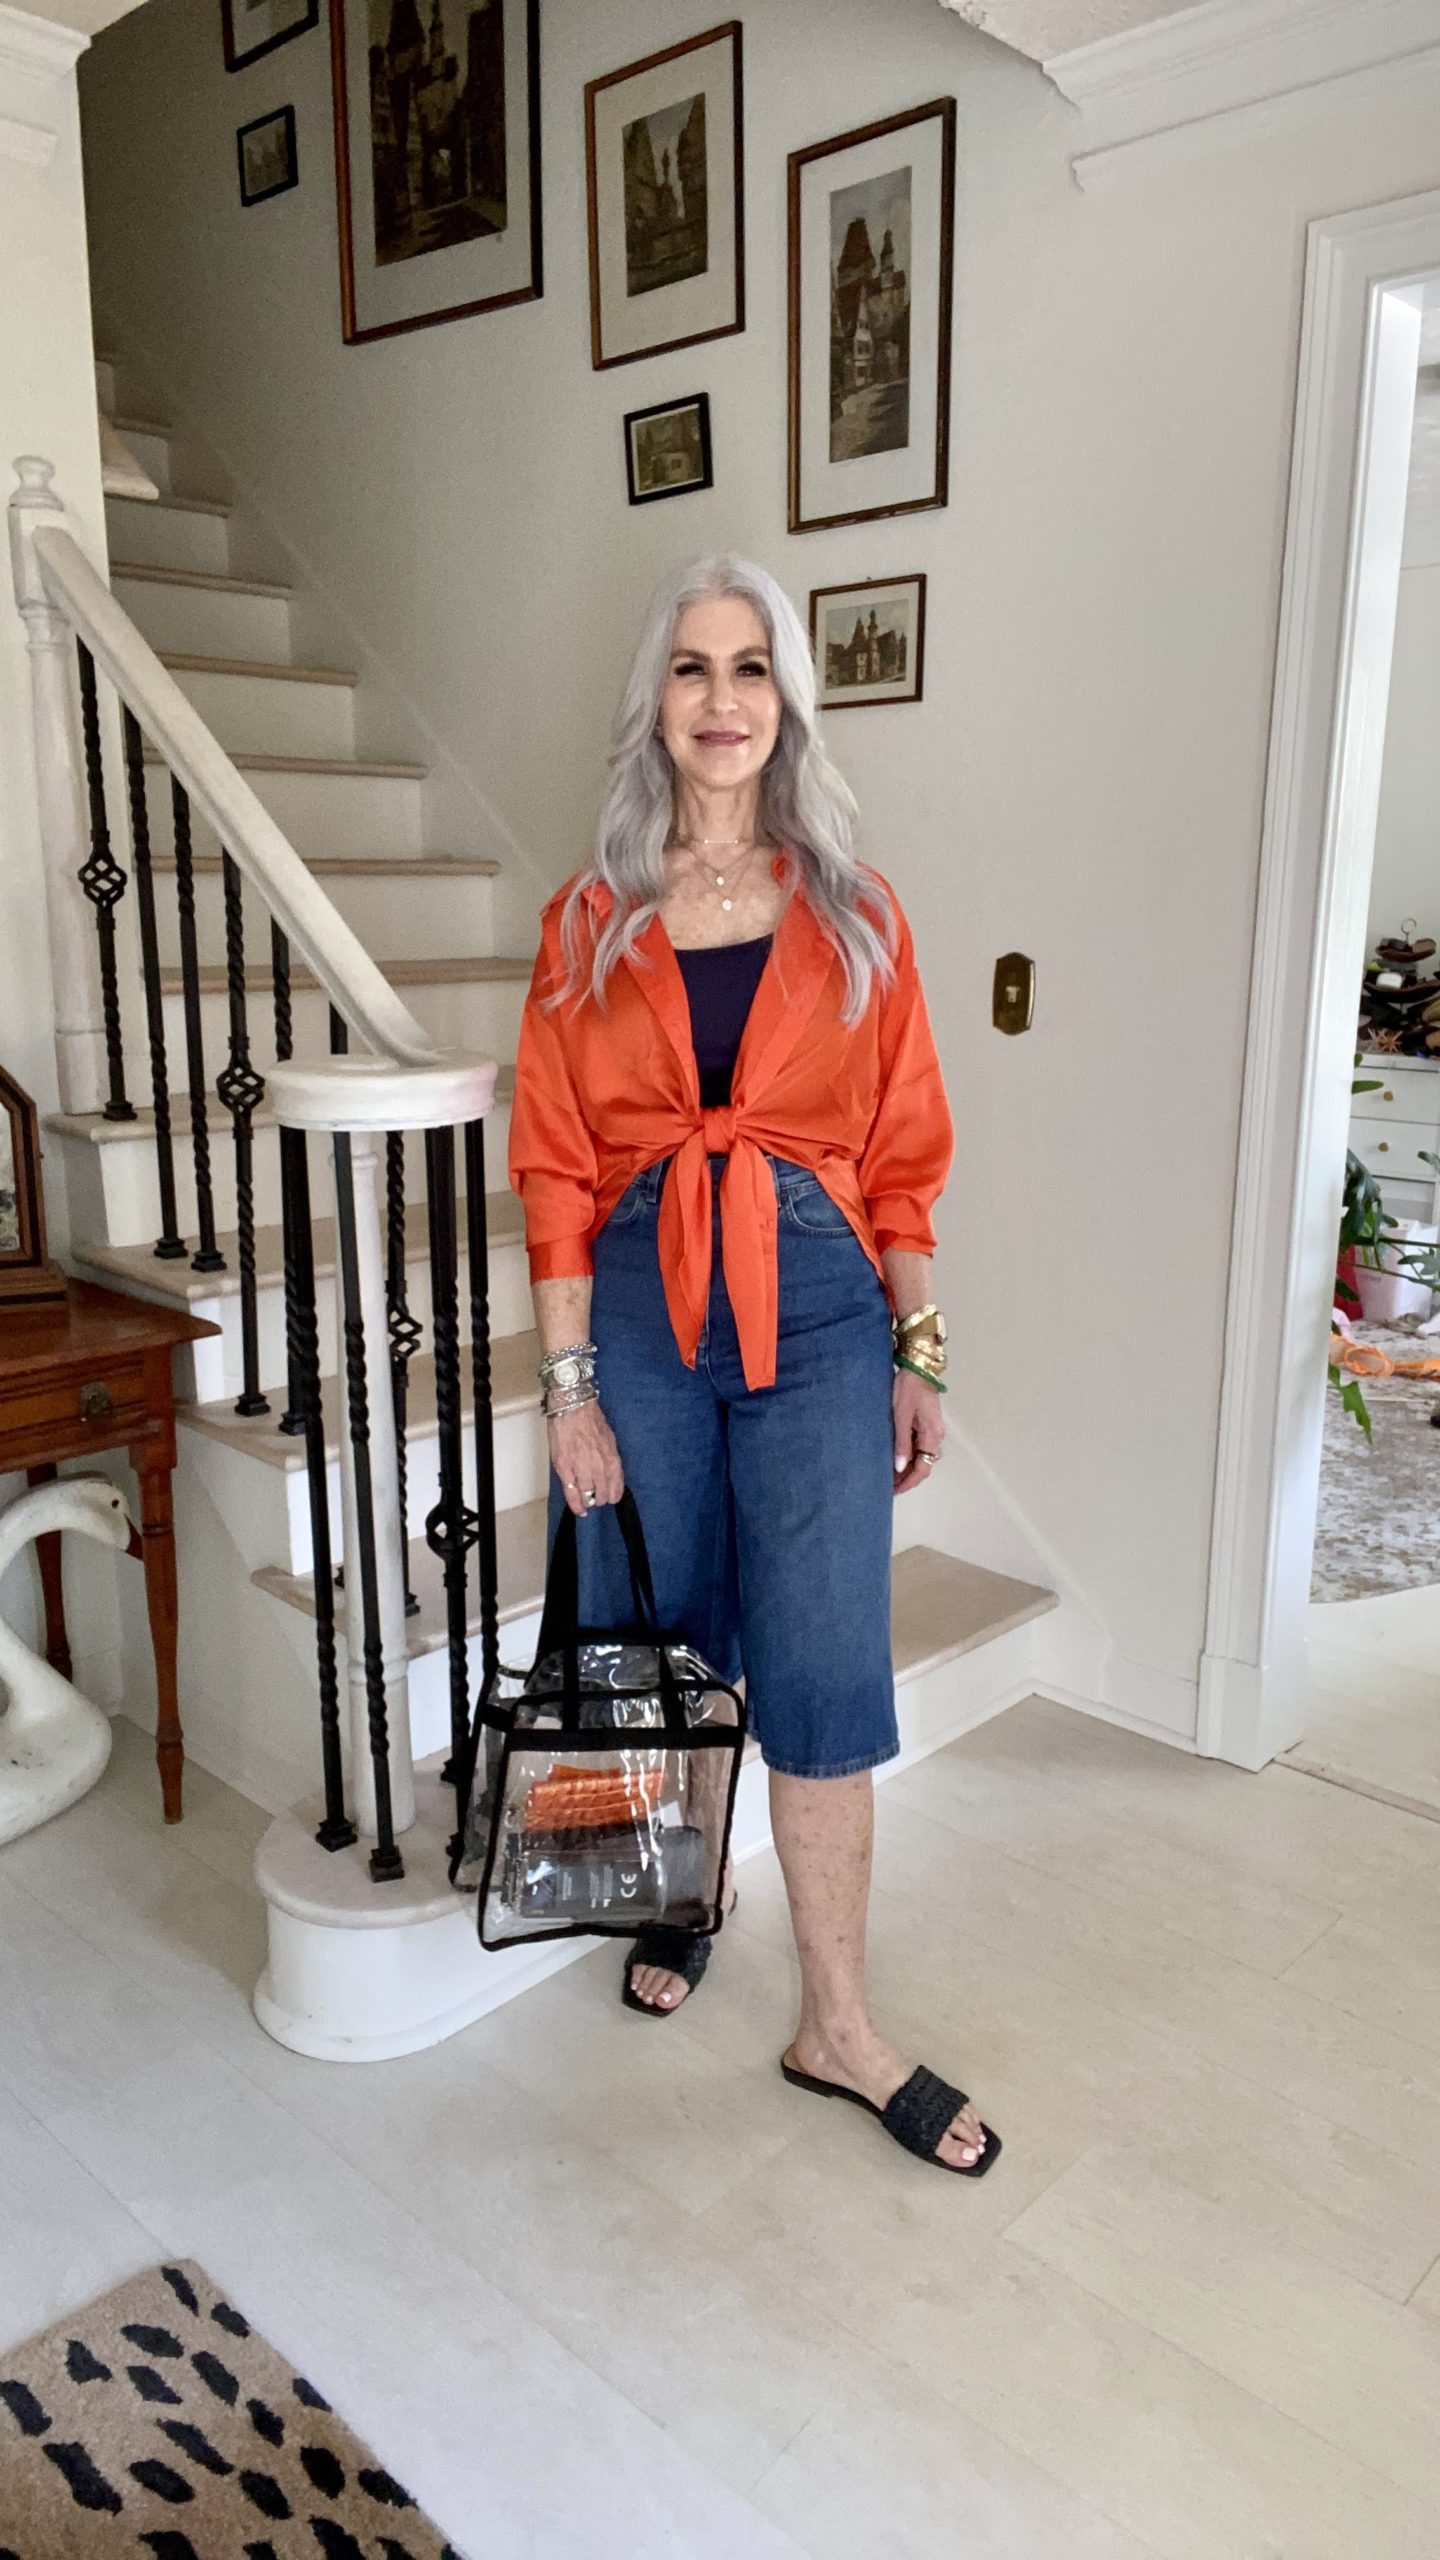 silver hair lady wearing blue jeans and orange shirt